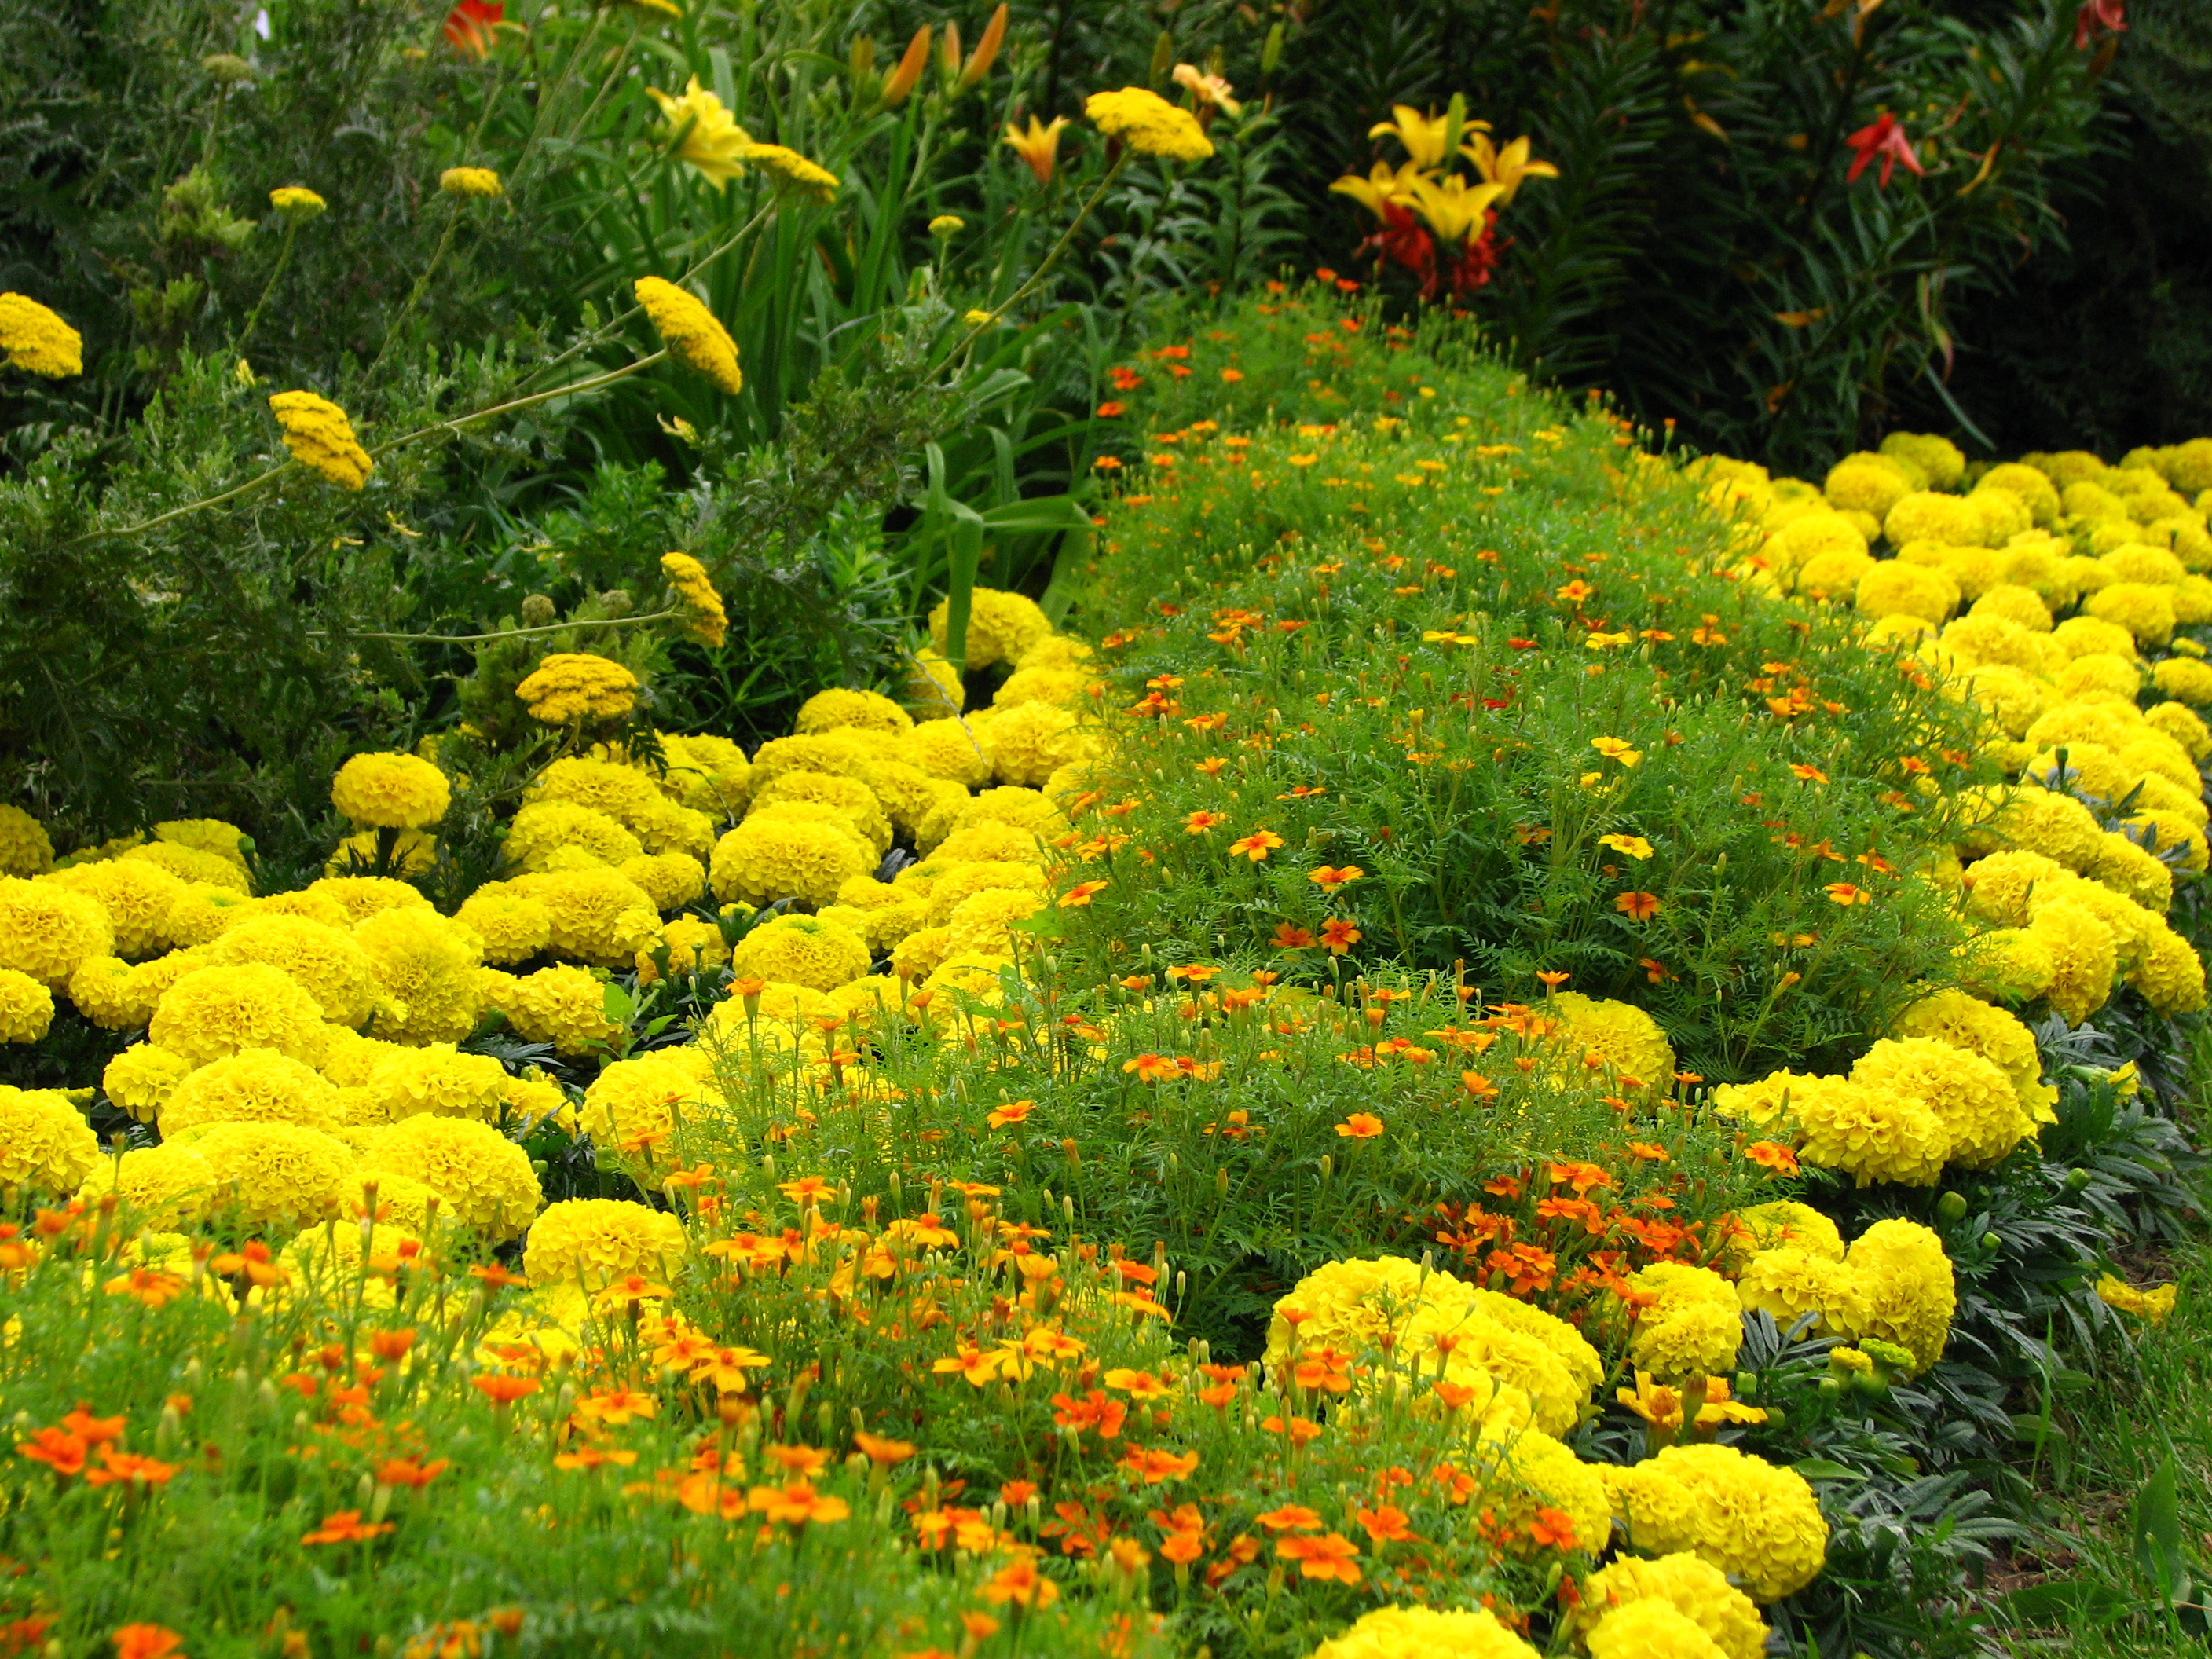 Bright flower bed borders